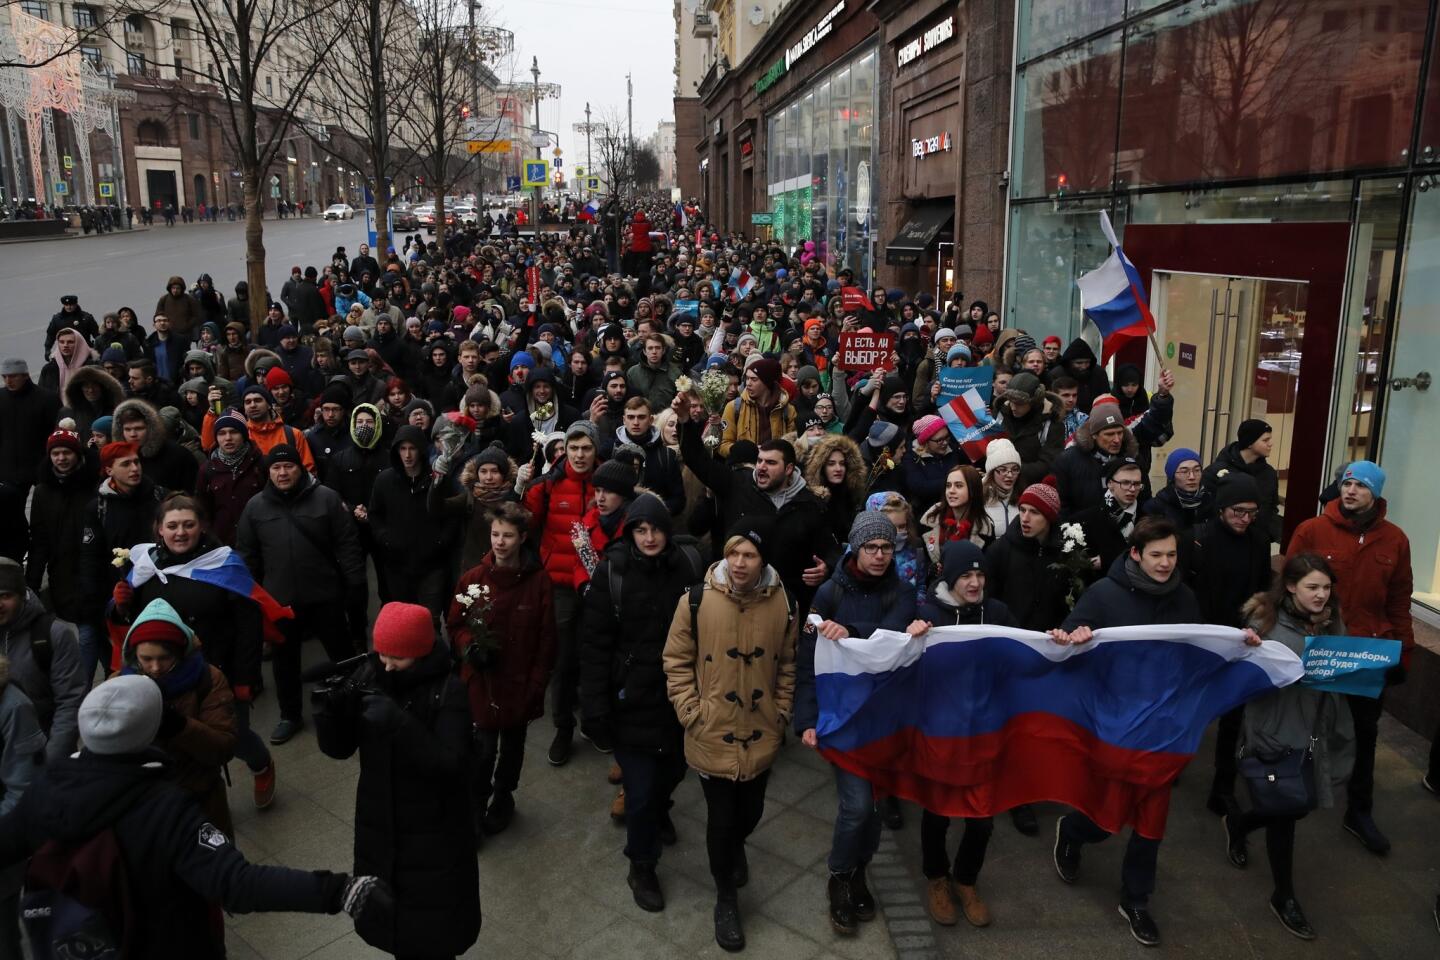 Protesters shout slogans during a rally in Moscow on Jan. 28, 2018, against Russia's Central Election Commission's decision to ban the opposition leader Alexei Navalny presidential candidacy.